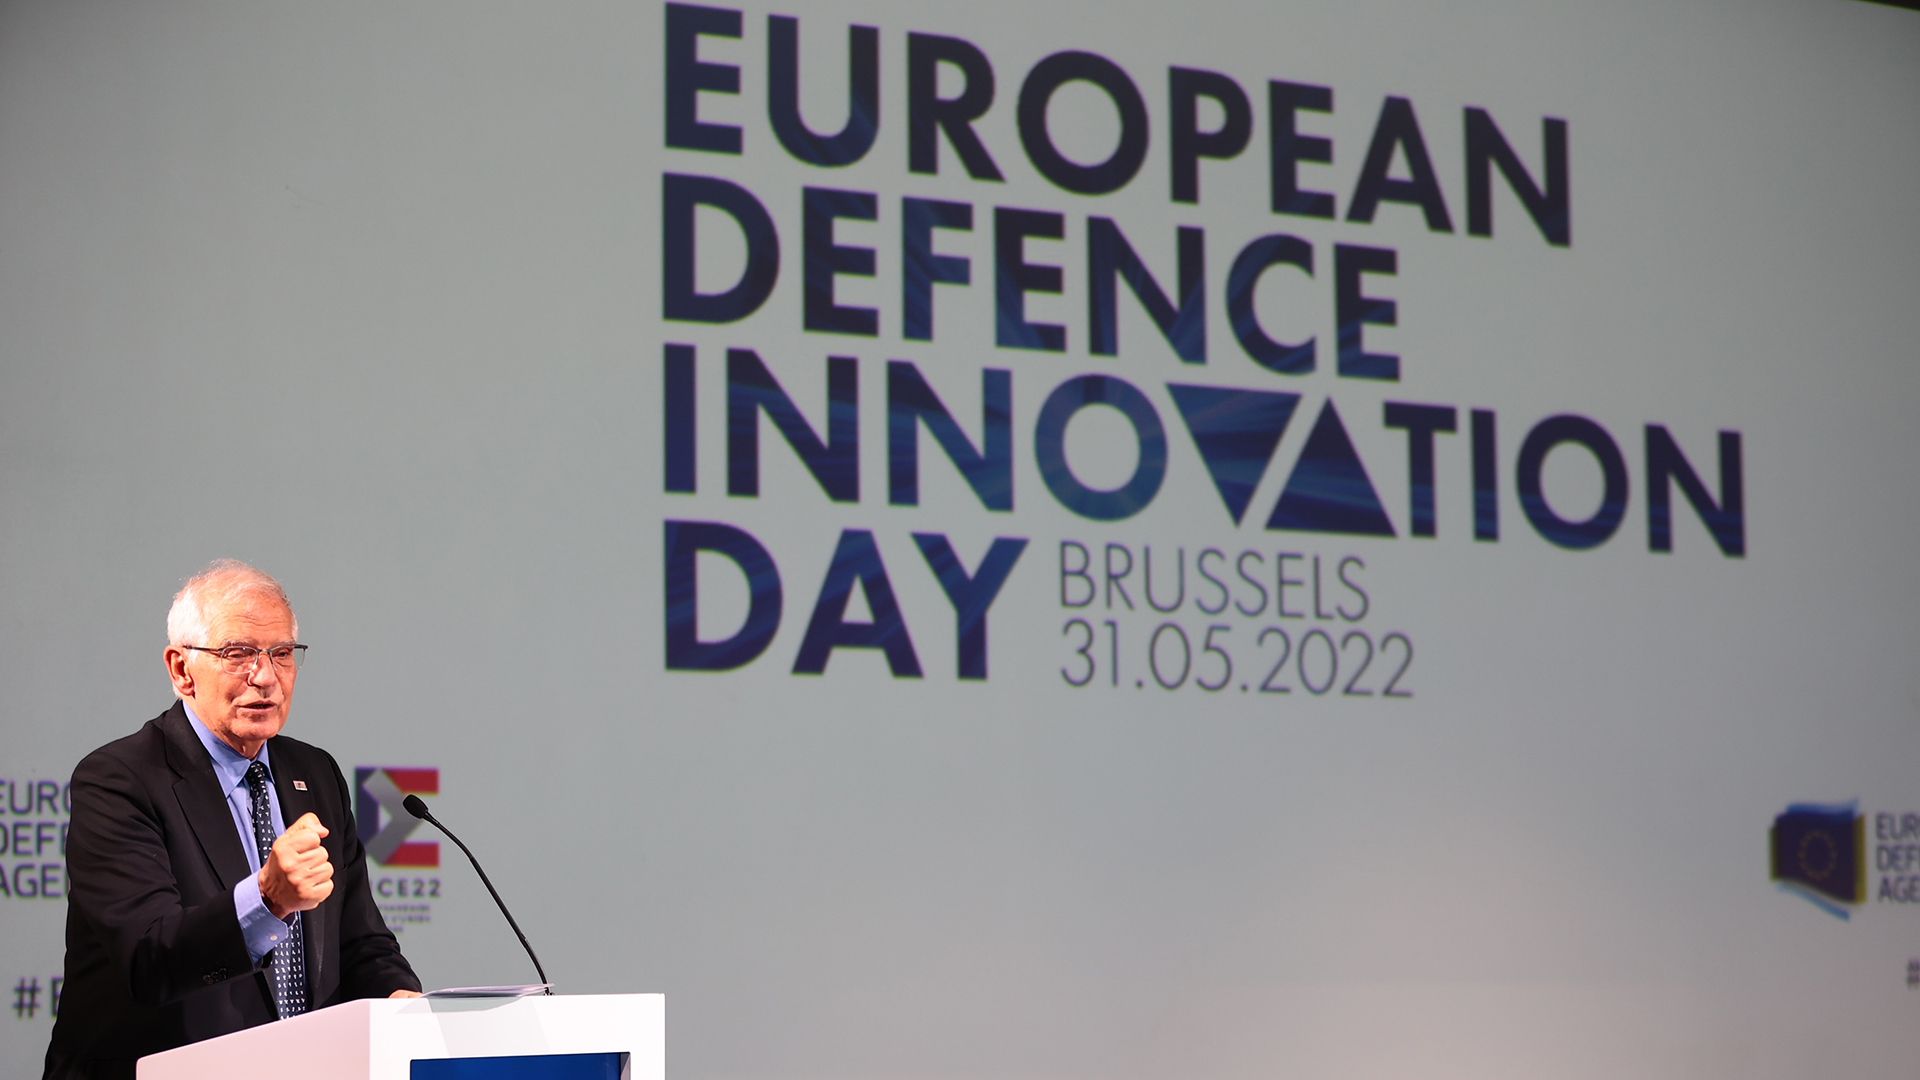 First European Defence Innovation Day Calls for More Investment and Cooperation